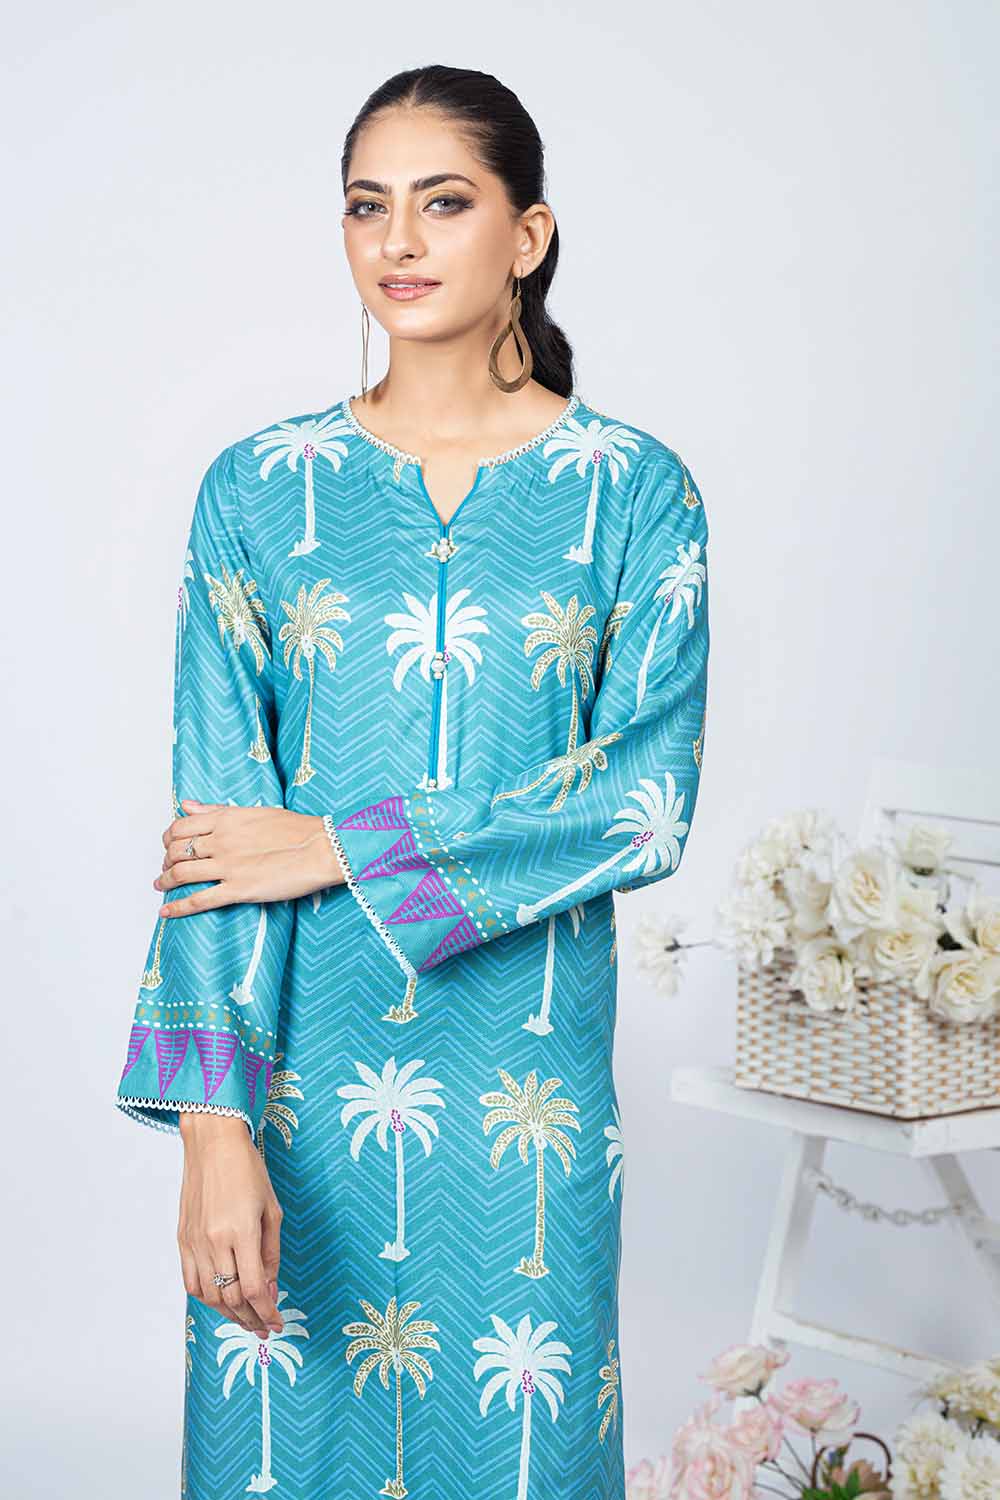 Unstitched Printed Twill Linen Salwar Kameez Suit Gul Ahmed WNSS-32013